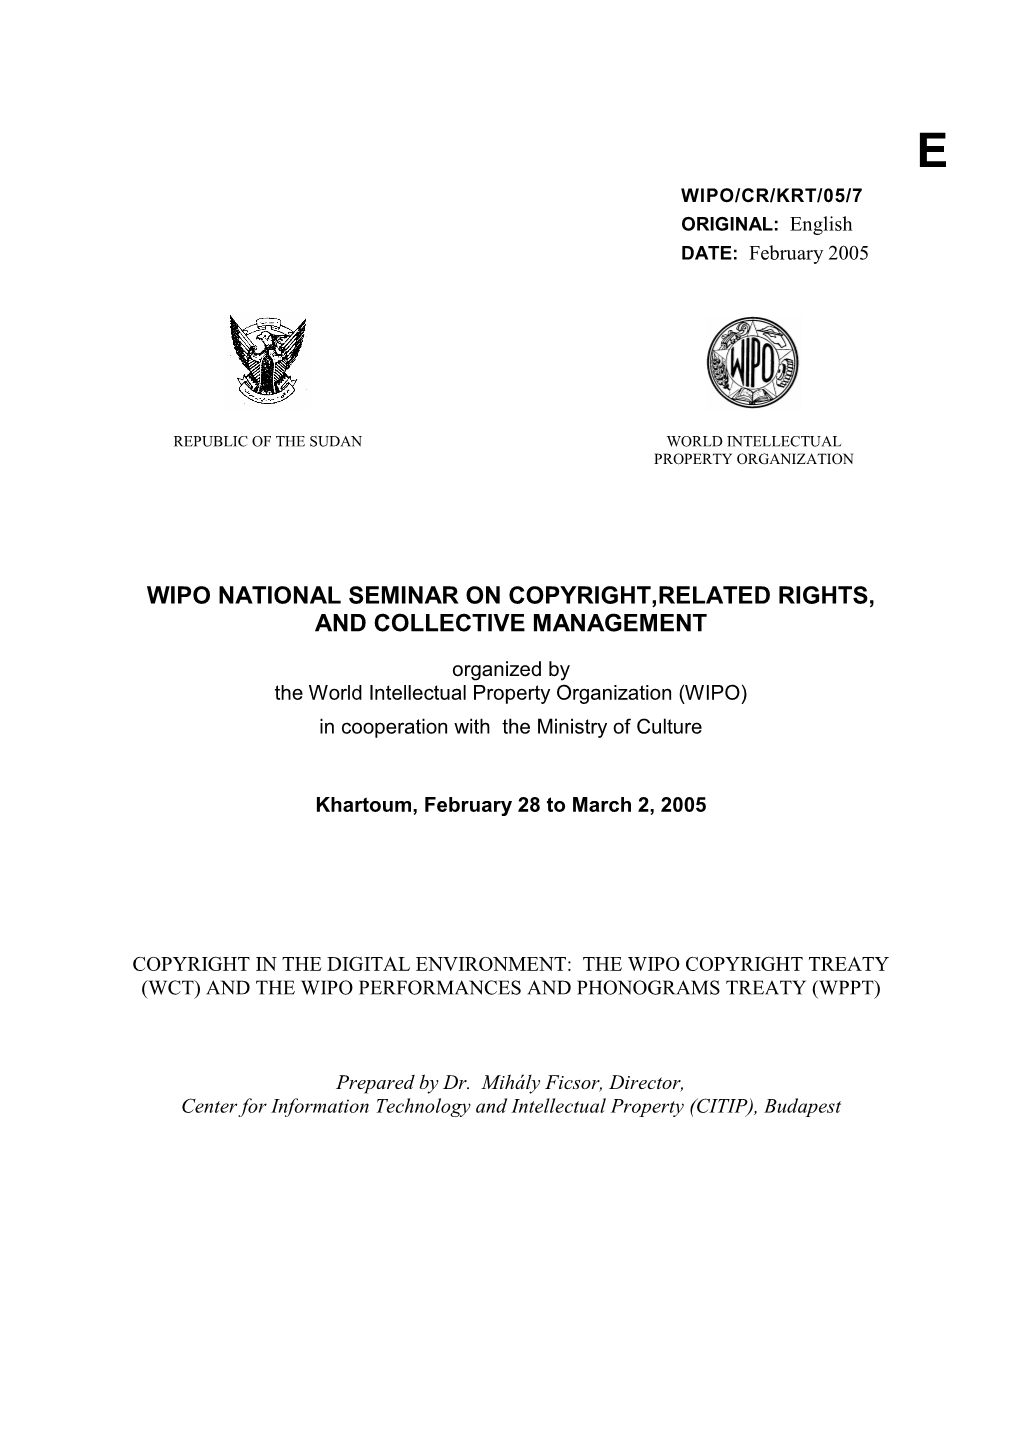 WIPO/CR/KRT/05/7 : Copyright in the Digital Environment: the WIPO Copyright Treaty (WCT) and the WIPO Performances and Phonogram